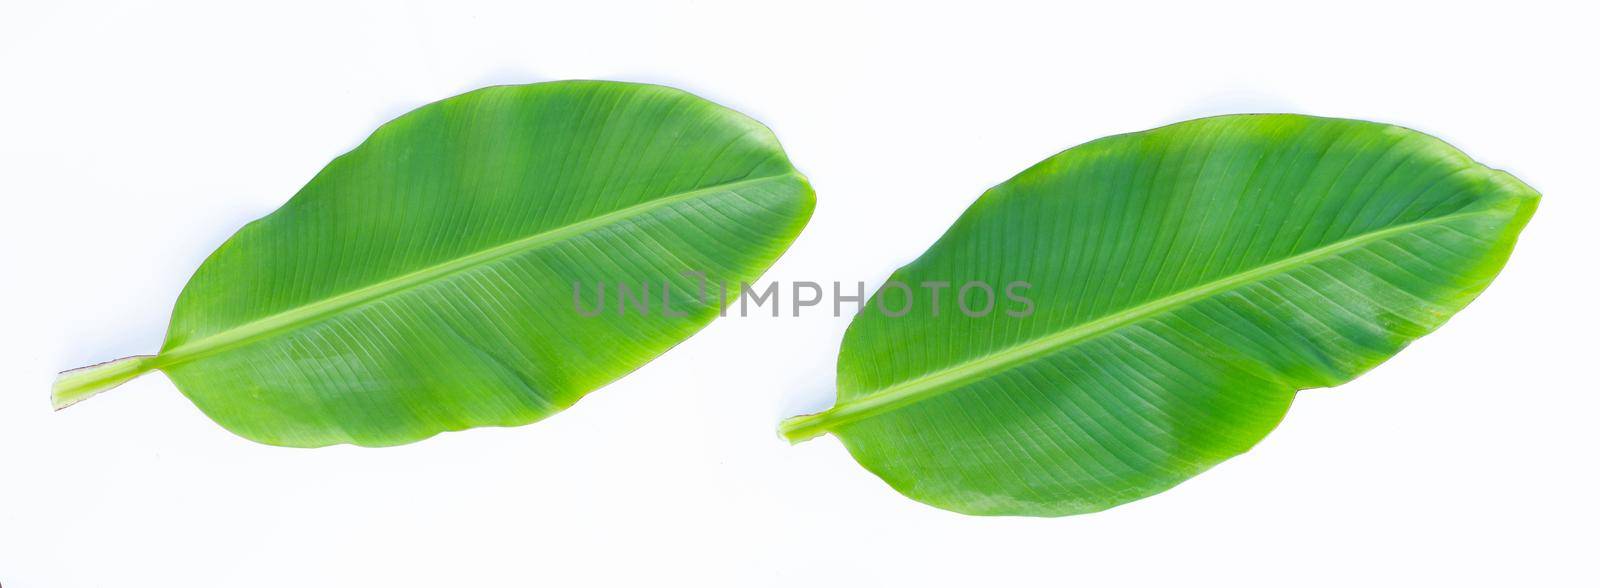 Banana leaves on white background. by Bowonpat